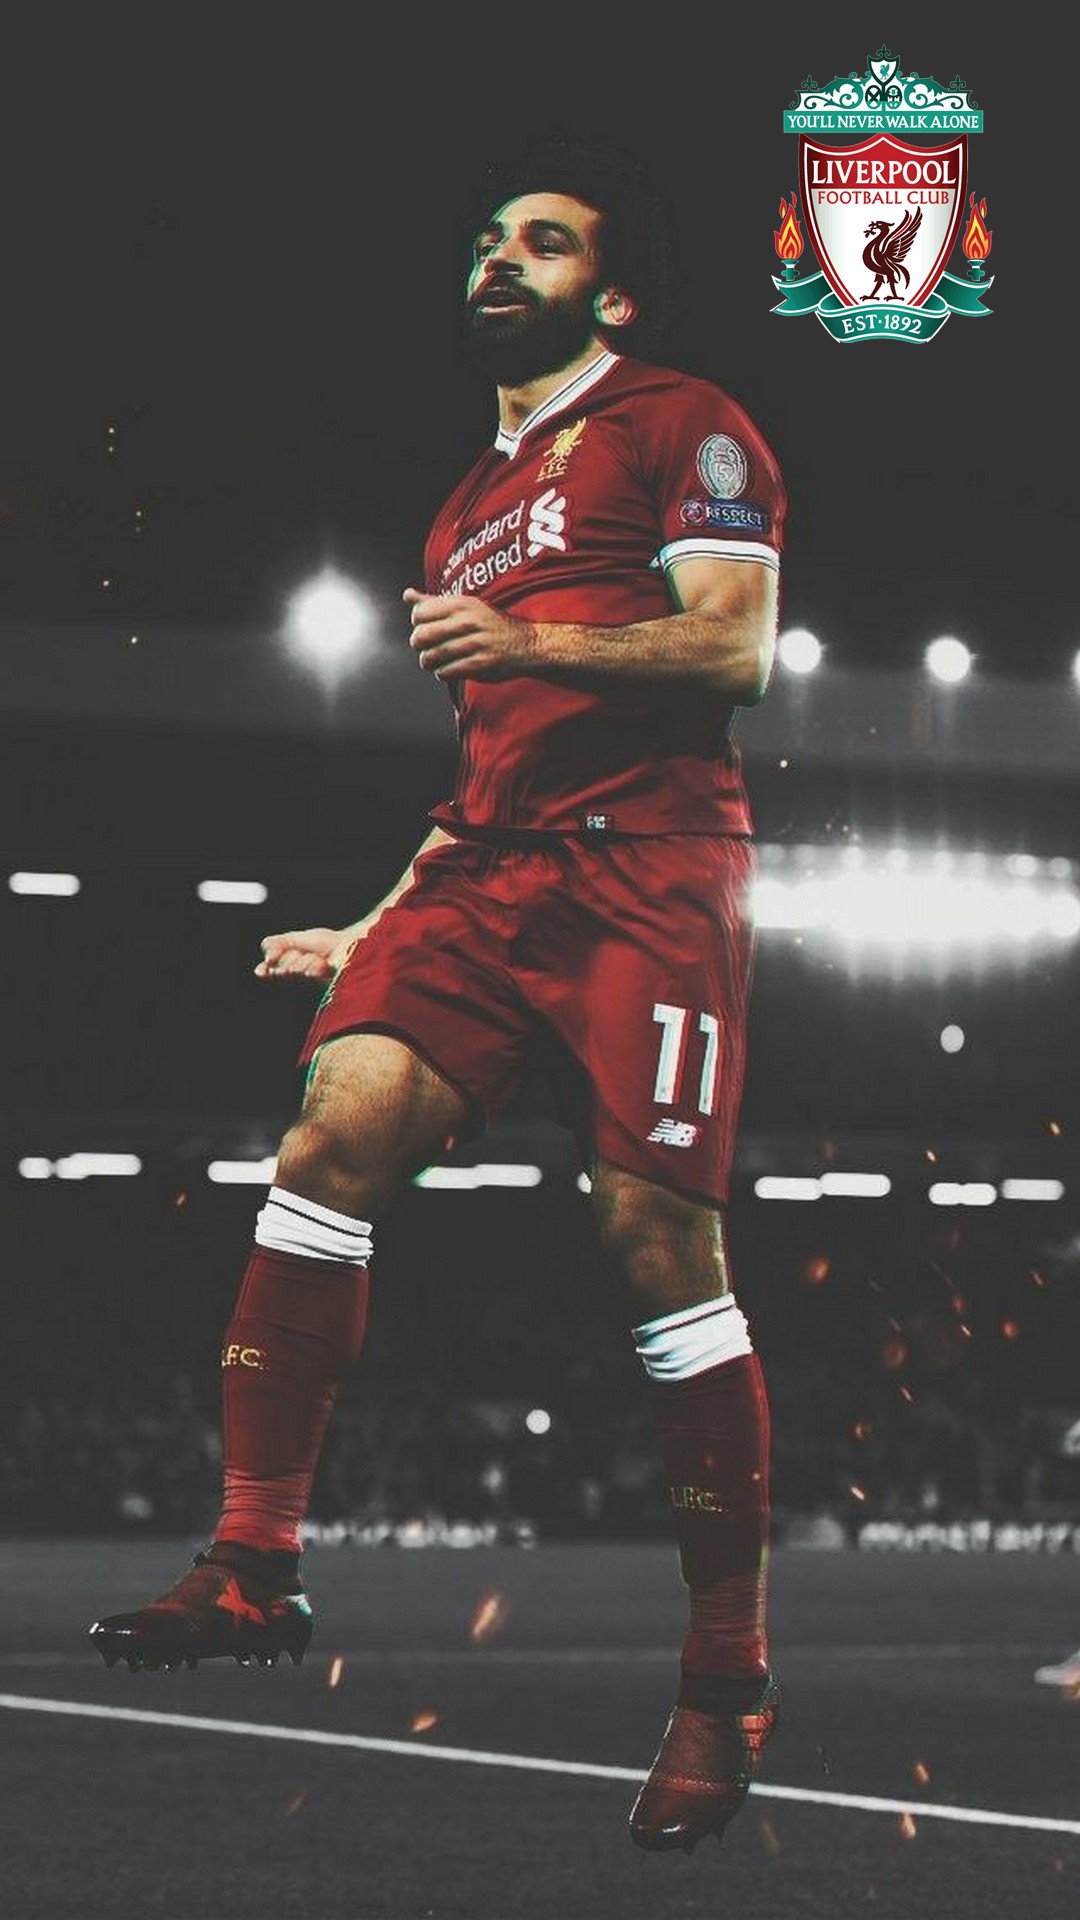 Mo Salah Wallpaper For iPhone with image resolution 1080x1920 pixel. You can make this wallpaper for your iPhone 5, 6, 7, 8, X backgrounds, Mobile Screensaver, or iPad Lock Screen